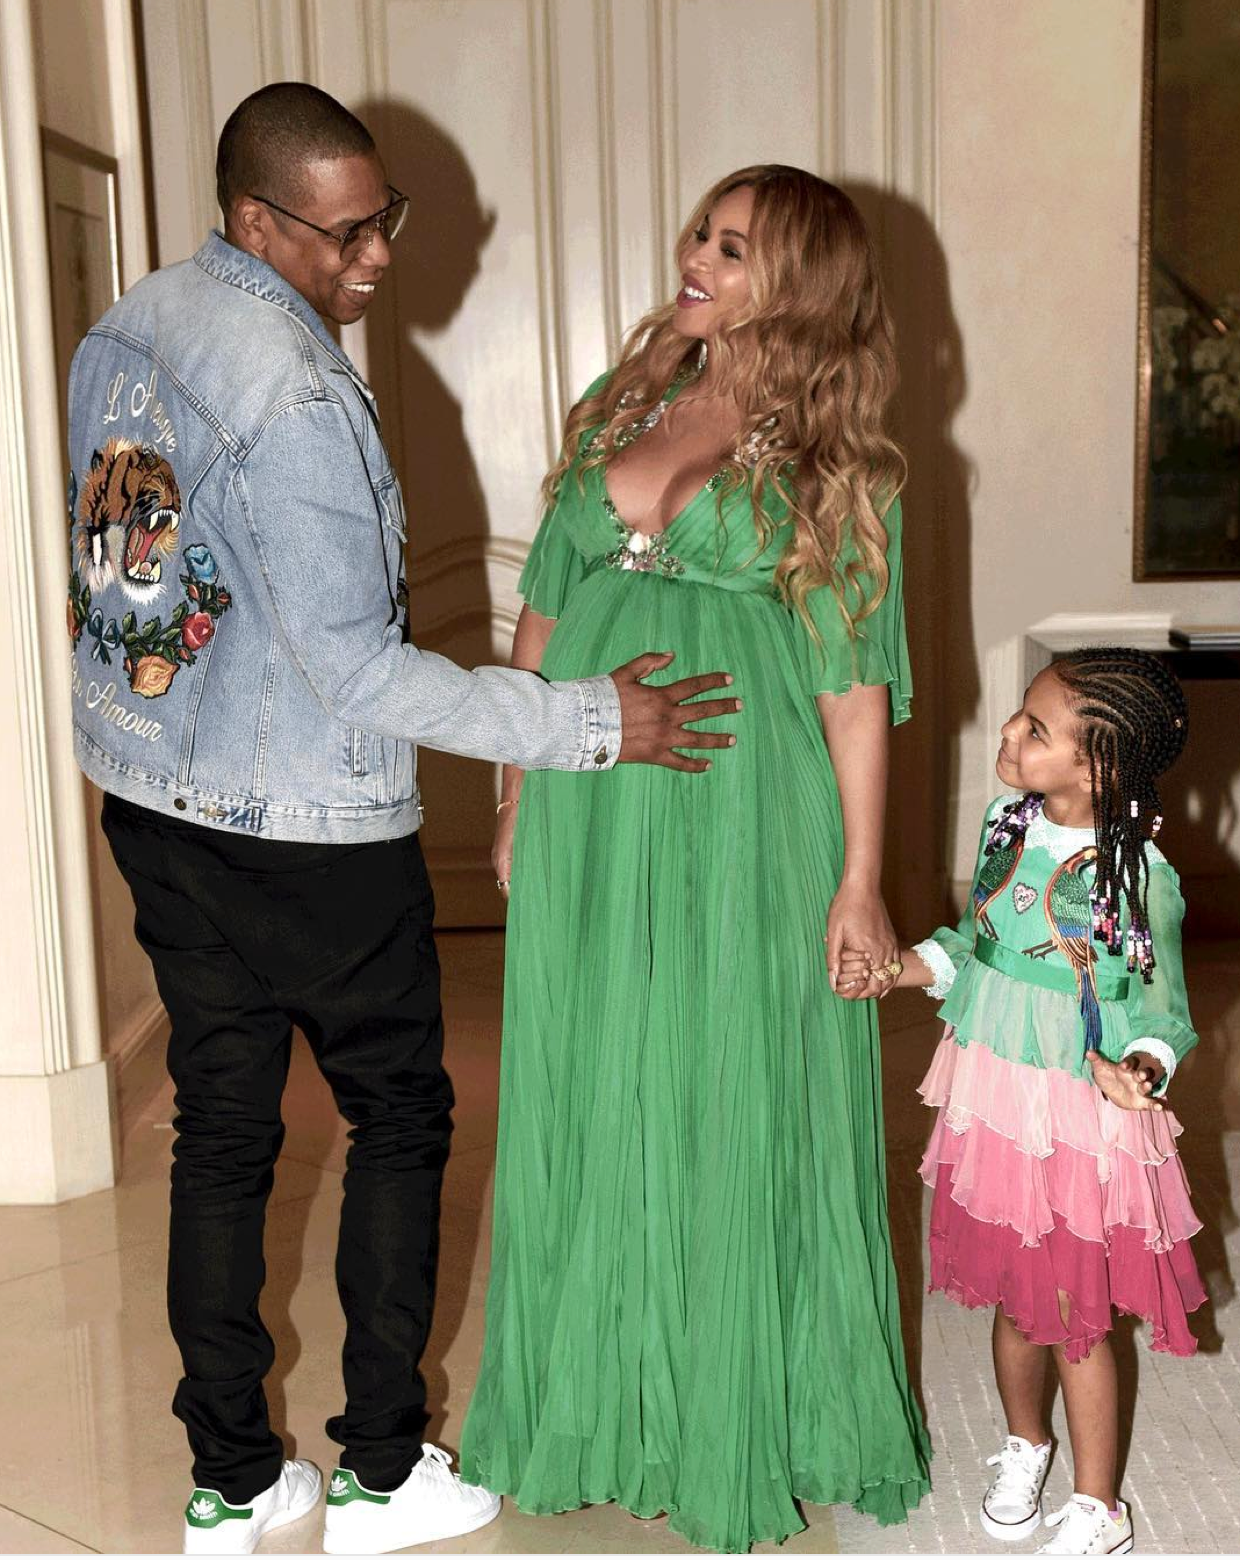 Adorable Overload: Beyoncé and Blue Ivy Wear Green Dresses for 'Beauty and the Beast' Premiere